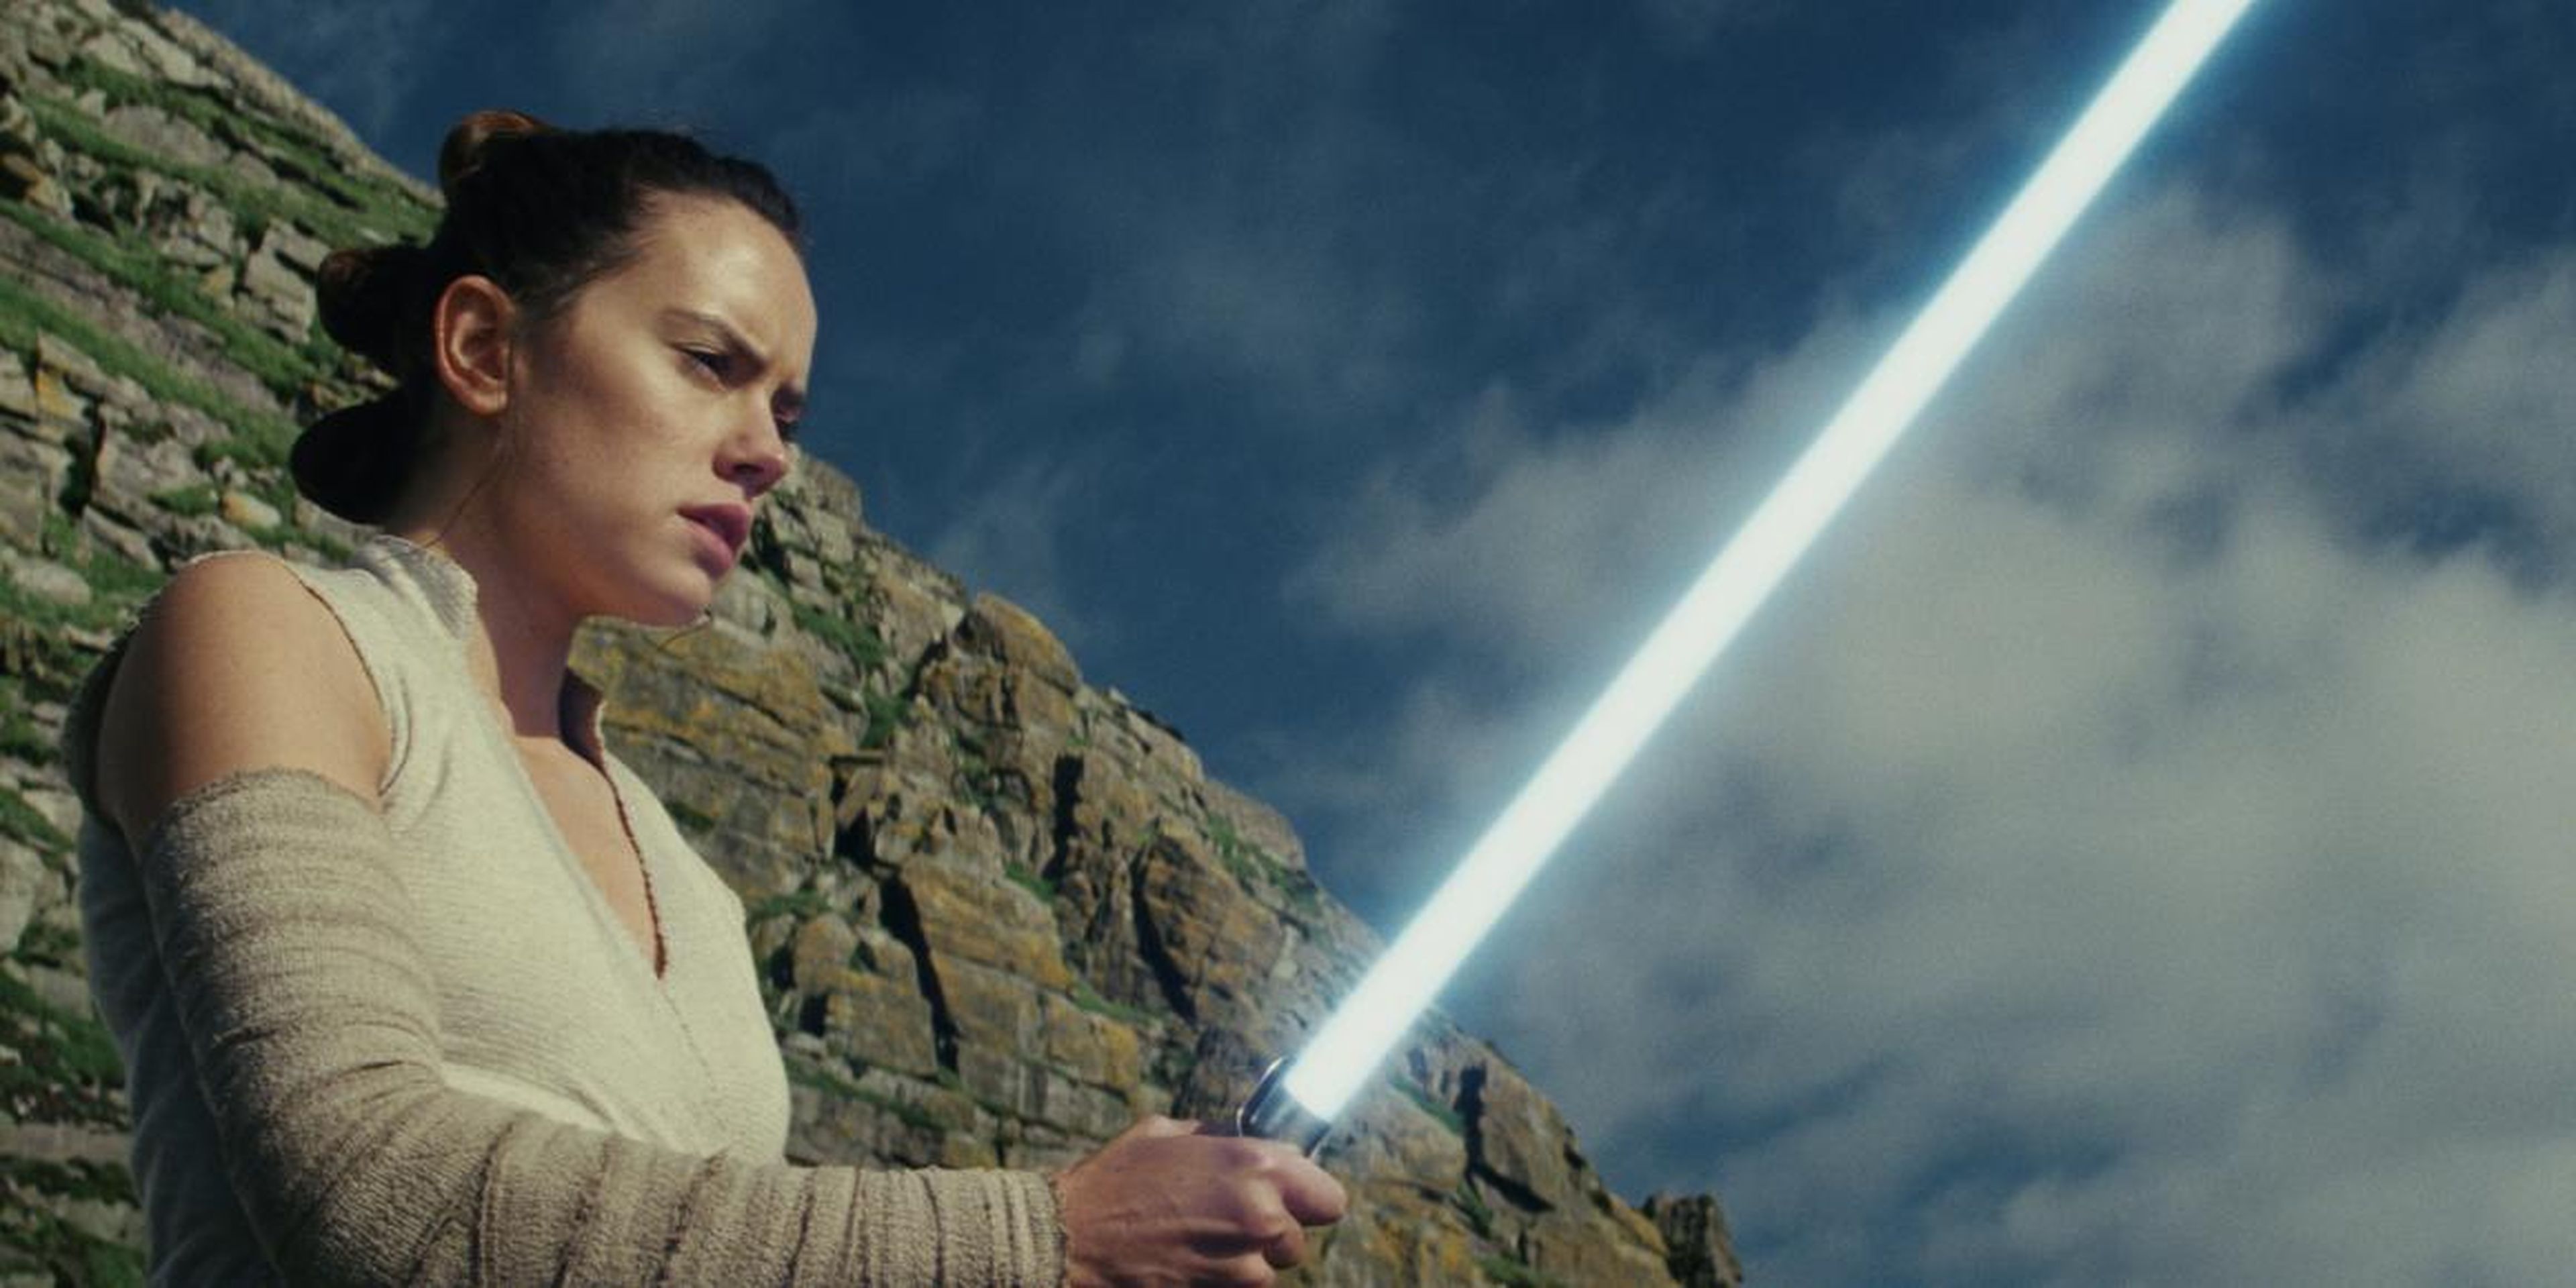 We're ready to see more of Jedi Rey.